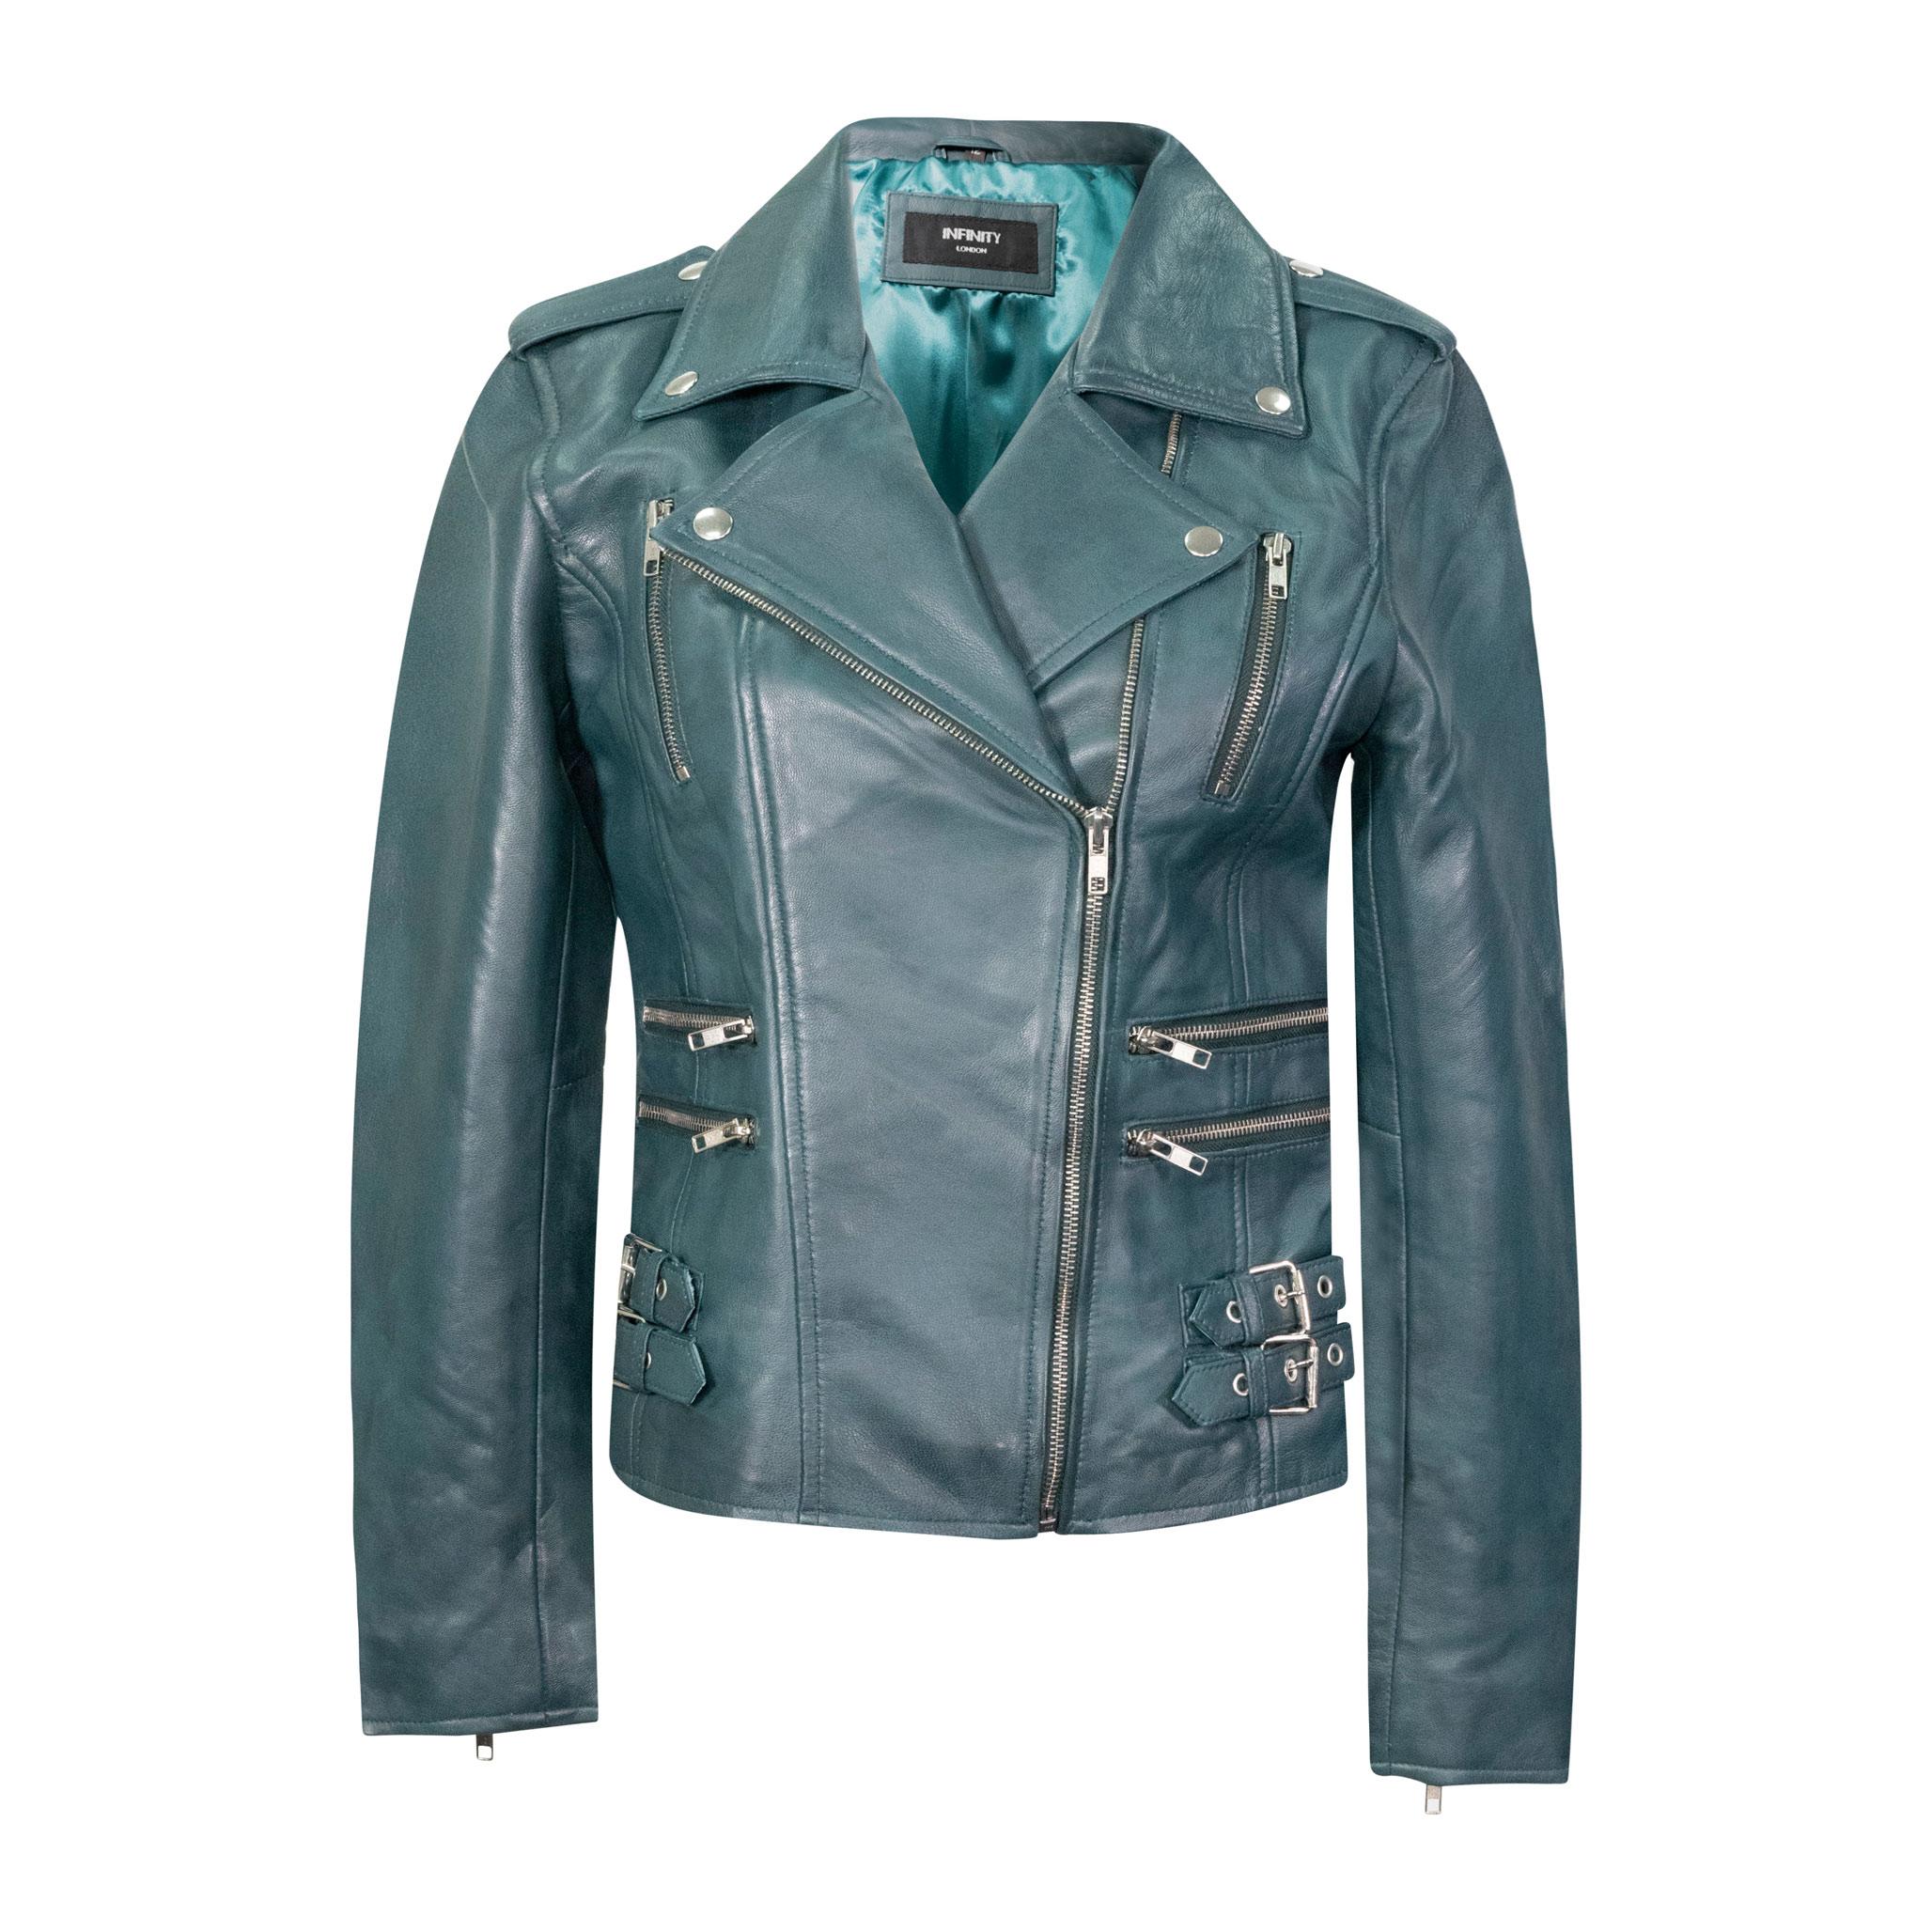 A teal green ladies leather biker jacket, with studs, pockets, zips, and notched lapels.